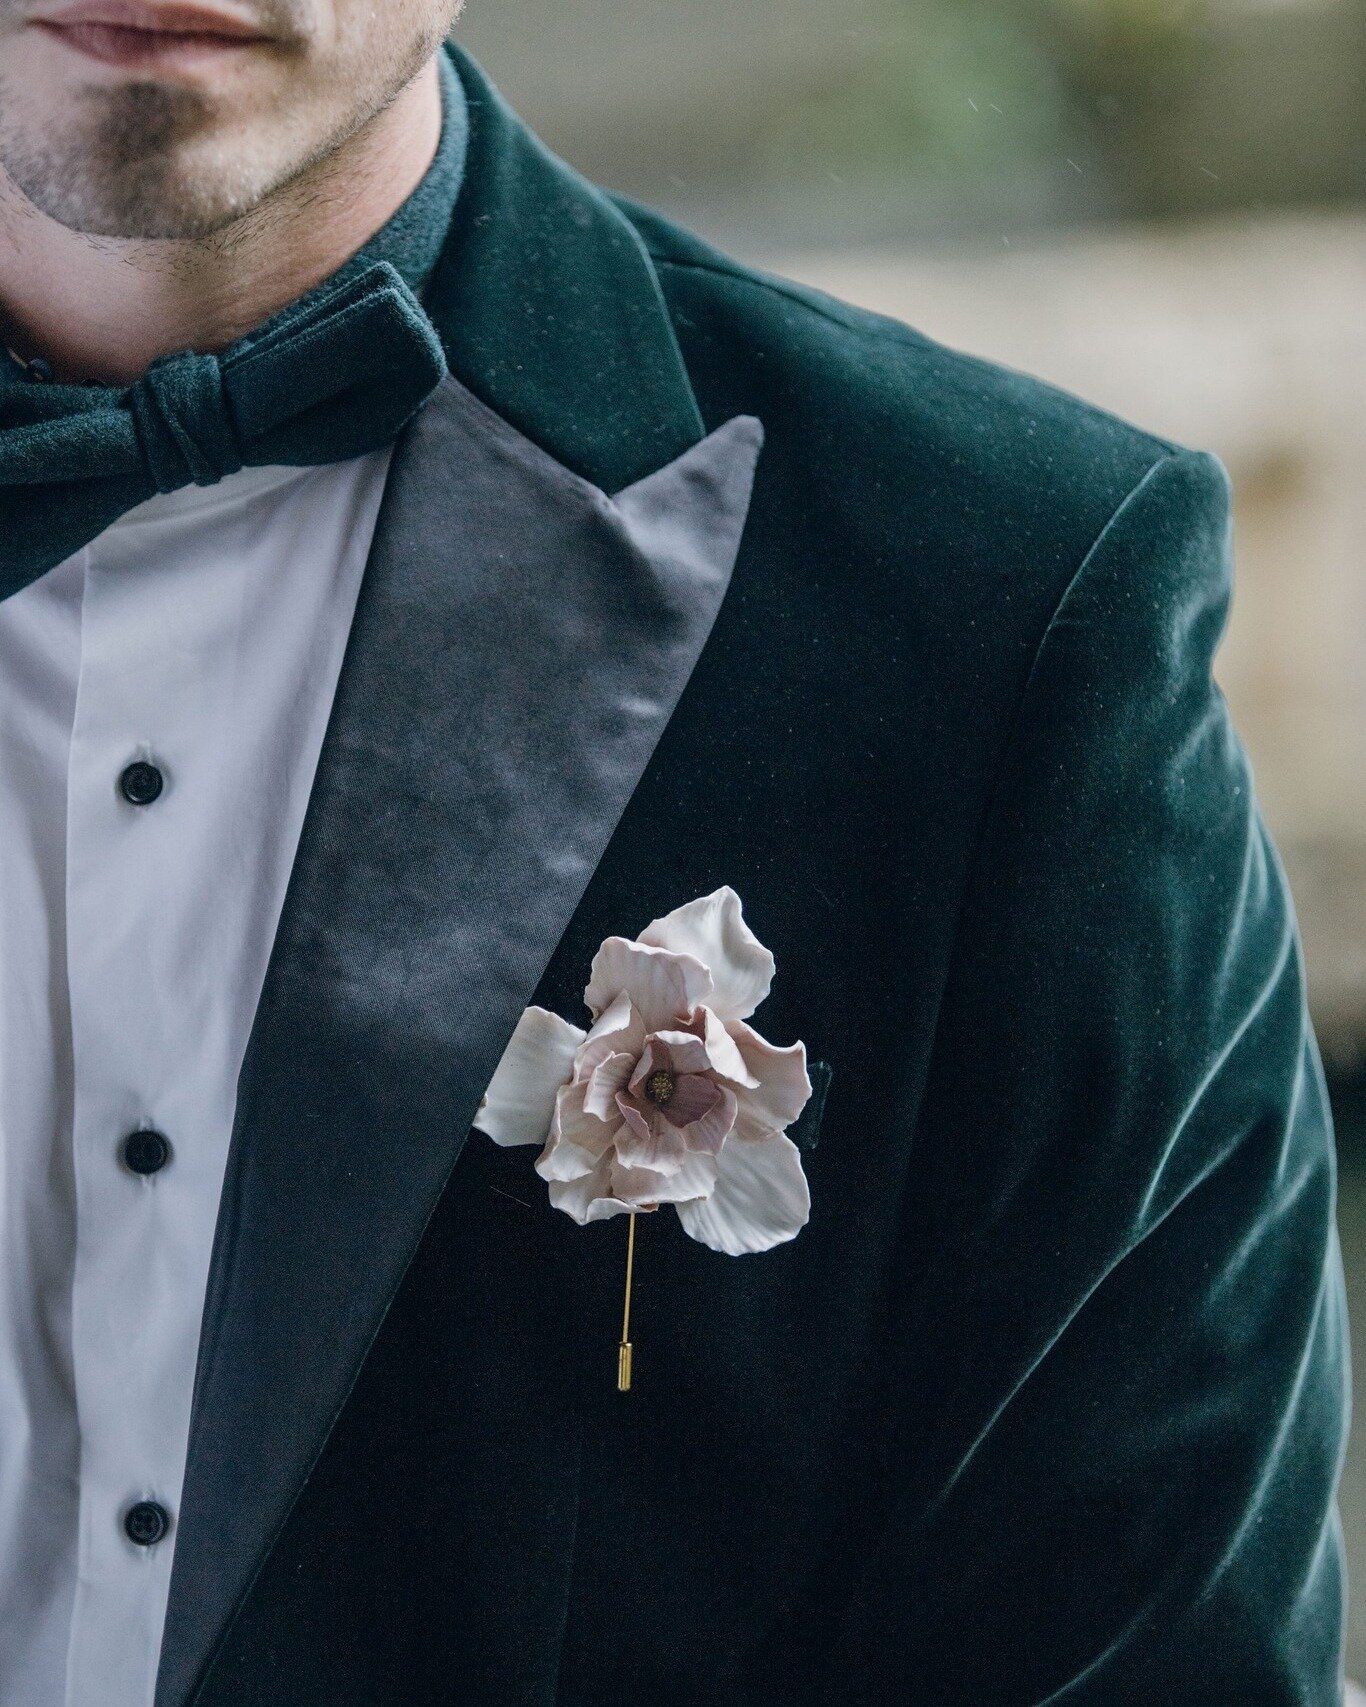 In need of something for your groom or groomsmen? Don't worry I have you covered with some unique floral buttonholes. The perfect keepsake and proving popular at the moment 🌸

Photographer @mariamadisonphotography
Venue @mataracentre
Stylist @leahol